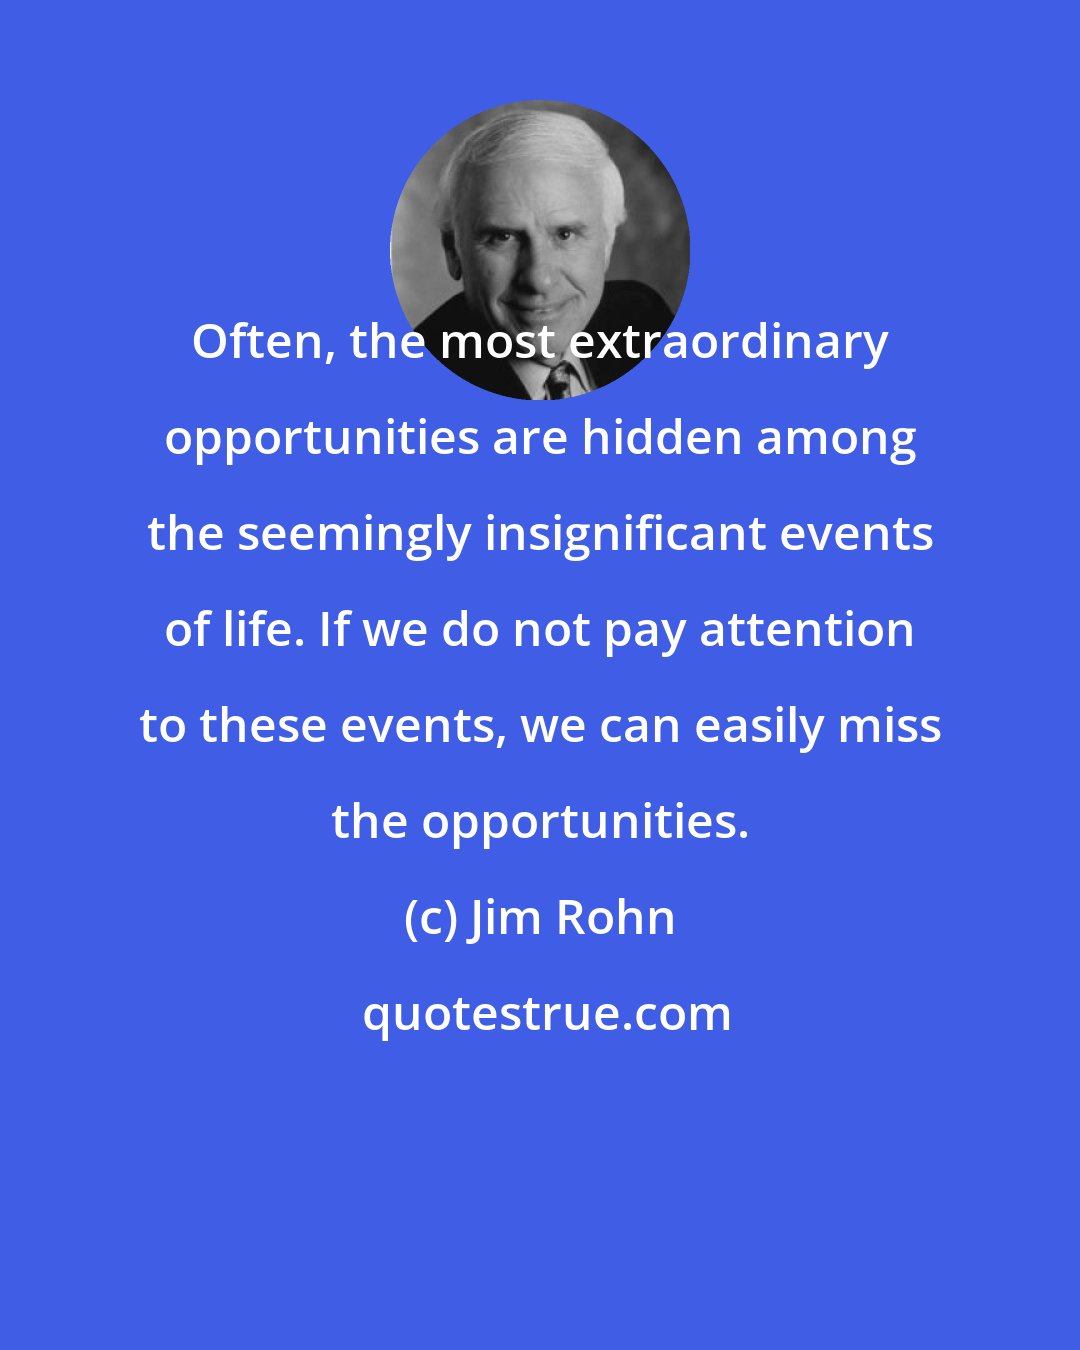 Jim Rohn: Often, the most extraordinary opportunities are hidden among the seemingly insignificant events of life. If we do not pay attention to these events, we can easily miss the opportunities.